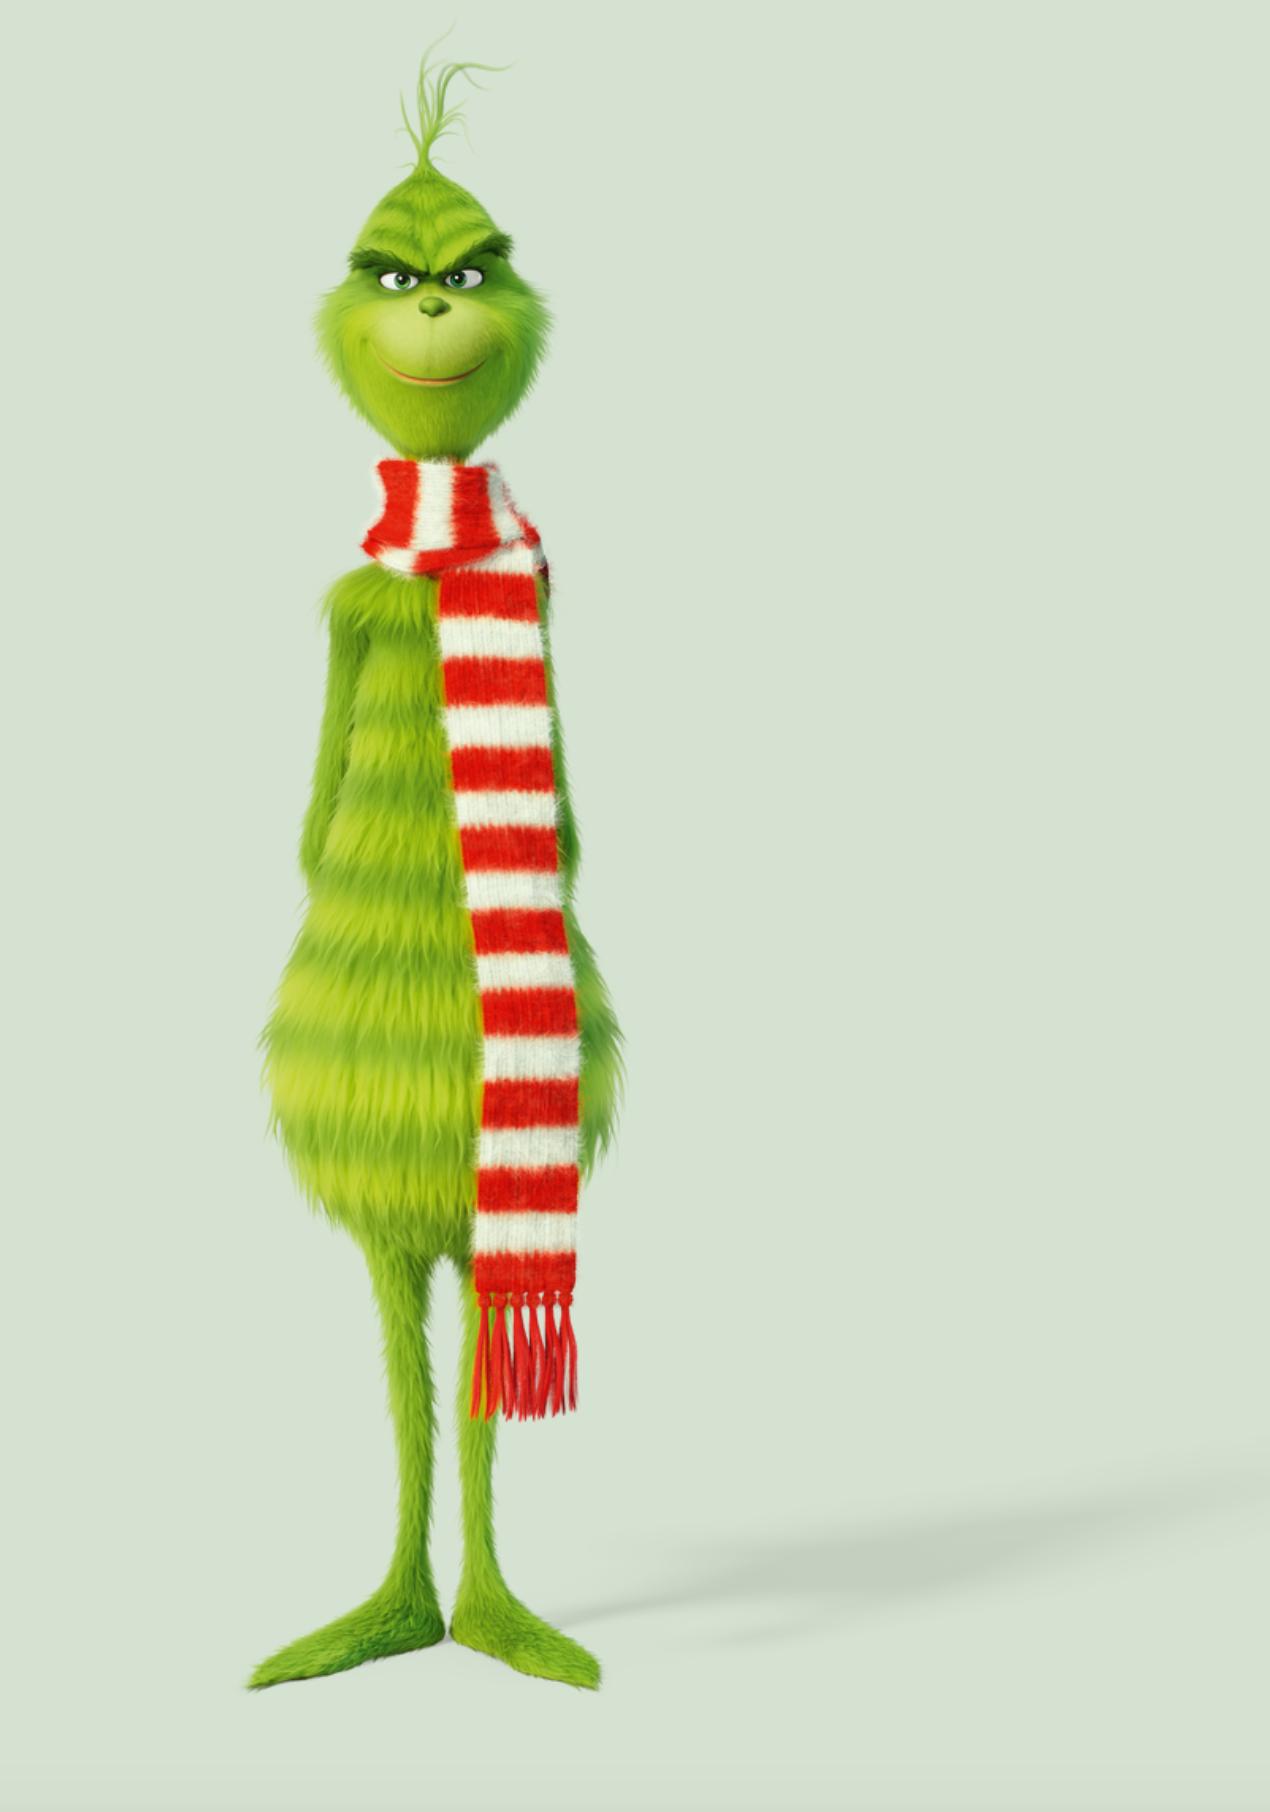 The Grinch  How The Grinch Stole Christmas Wallpaper 31423286  Fanpop